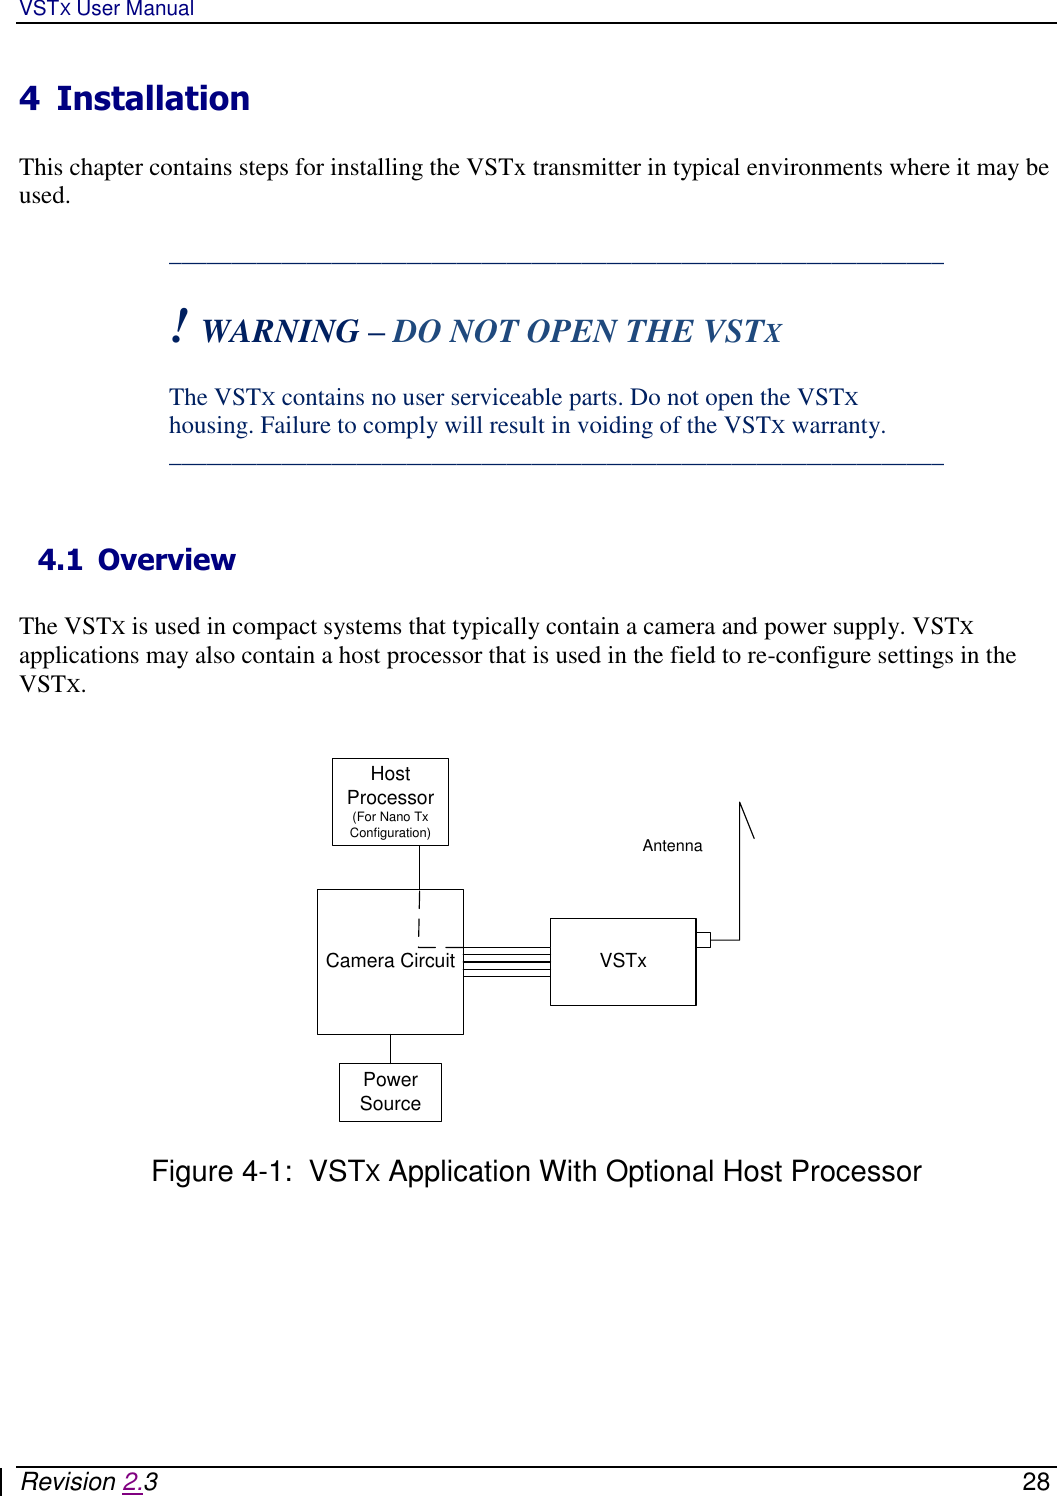 VSTX User Manual   Revision 2.3    28 4 Installation  This chapter contains steps for installing the VSTx transmitter in typical environments where it may be used.  ______________________________________________________________  ! WARNING – DO NOT OPEN THE VSTX   The VSTX contains no user serviceable parts. Do not open the VSTX housing. Failure to comply will result in voiding of the VSTX warranty.  ______________________________________________________________   4.1 Overview  The VSTX is used in compact systems that typically contain a camera and power supply. VSTX applications may also contain a host processor that is used in the field to re-configure settings in the VSTX.    VSTxCamera CircuitPower SourceHost Processor(For Nano Tx Configuration) Antenna  Figure 4-1:  VSTX Application With Optional Host Processor    